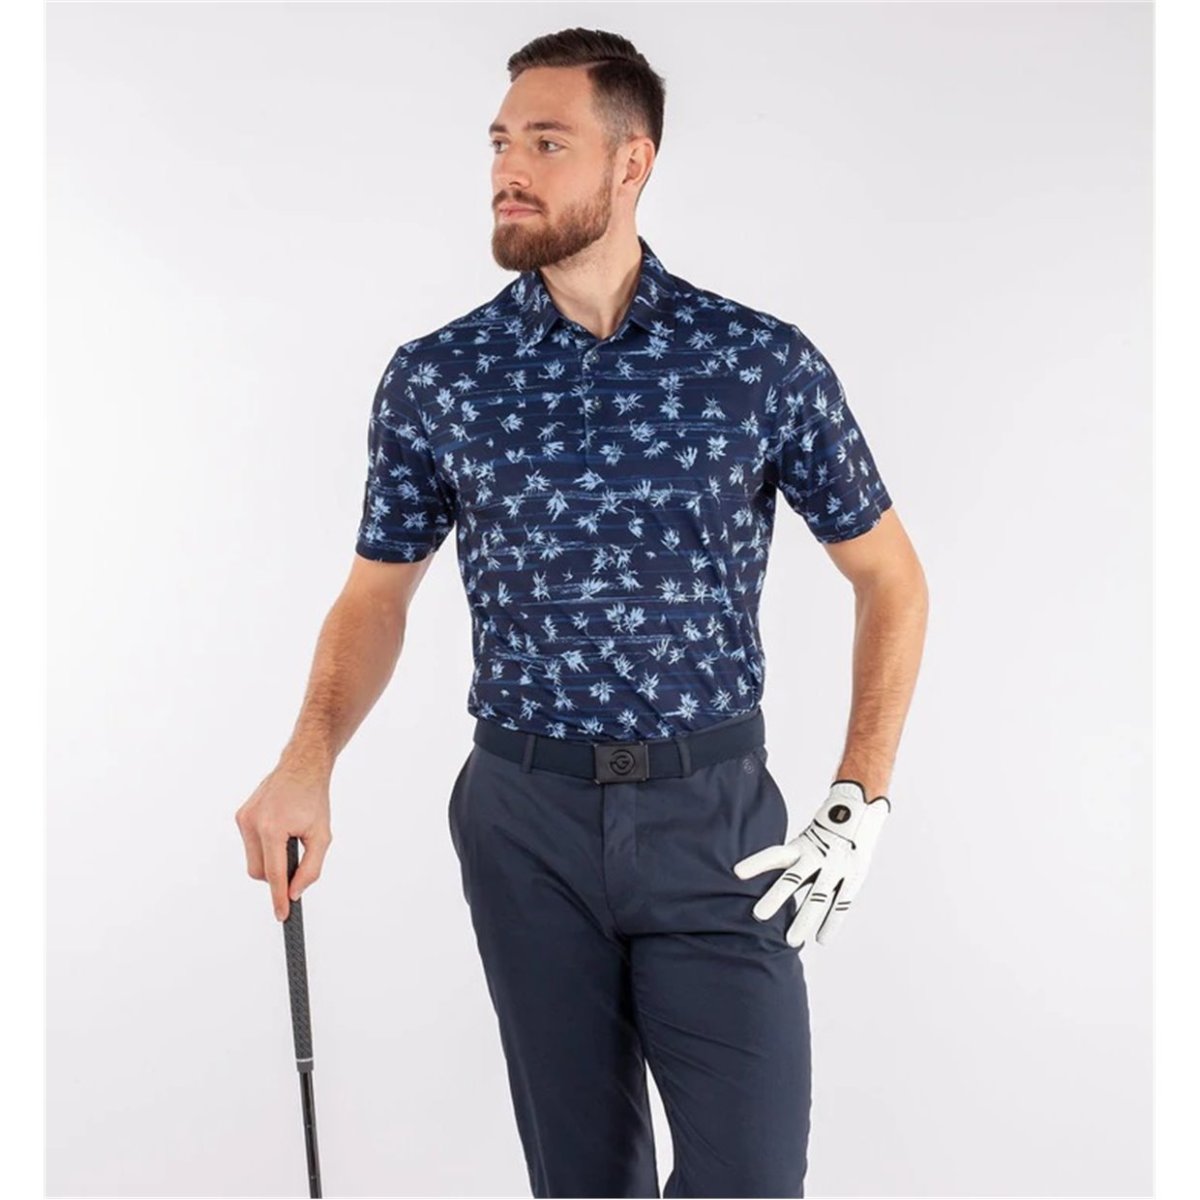 Shop the latest Galvin Green golf polo shirts on Morning Read's online pro shop.